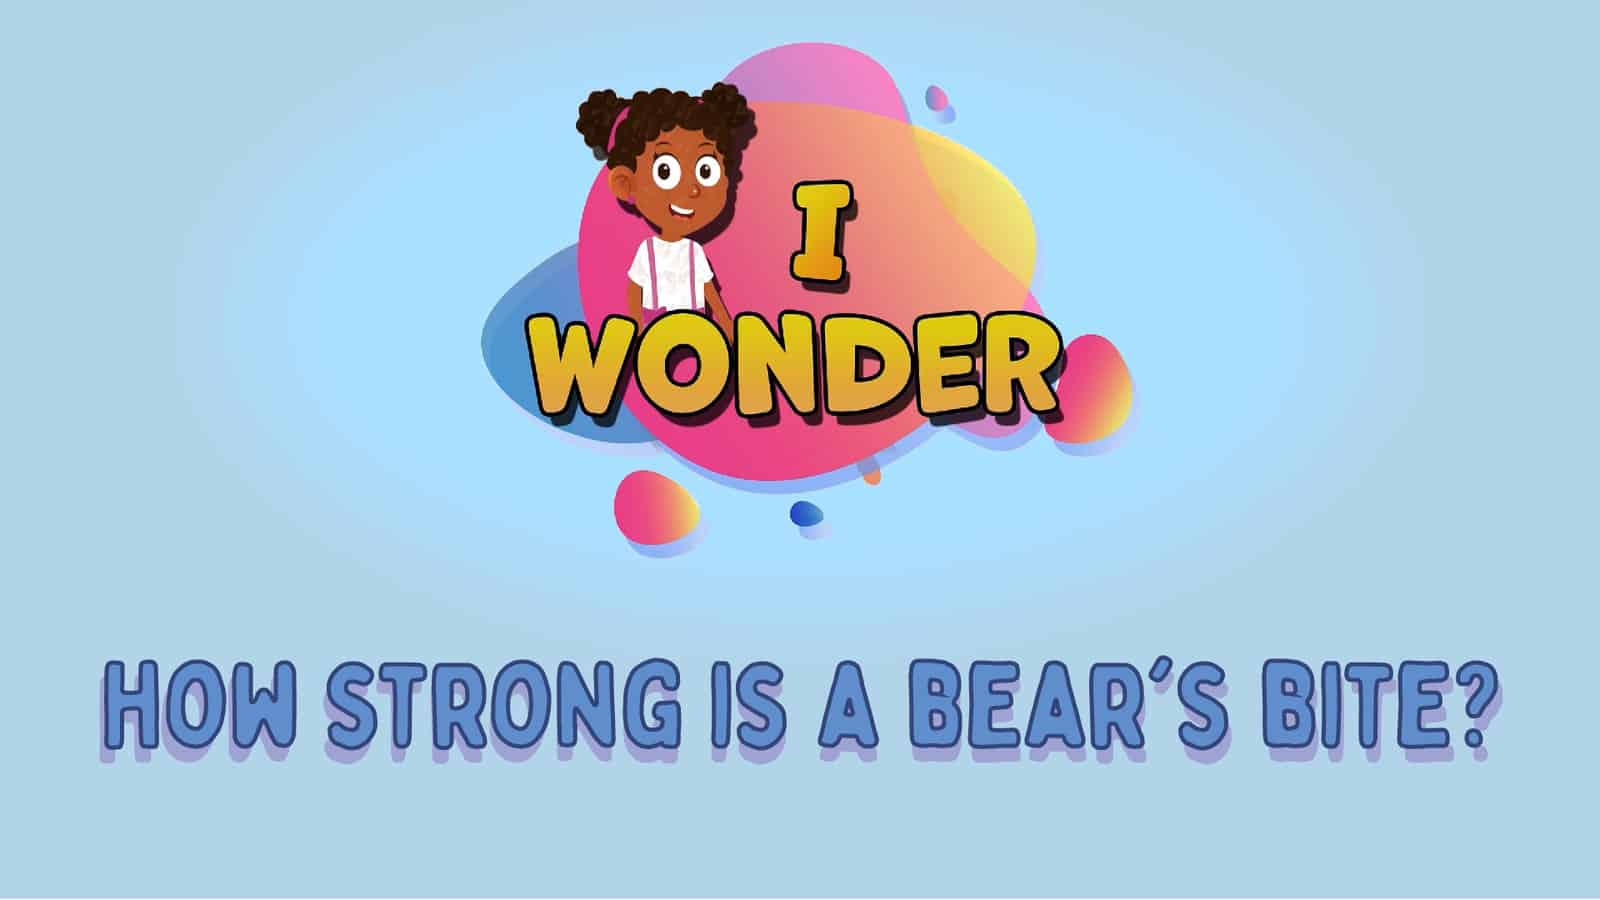 How Strong Is A Bear’s Bite?